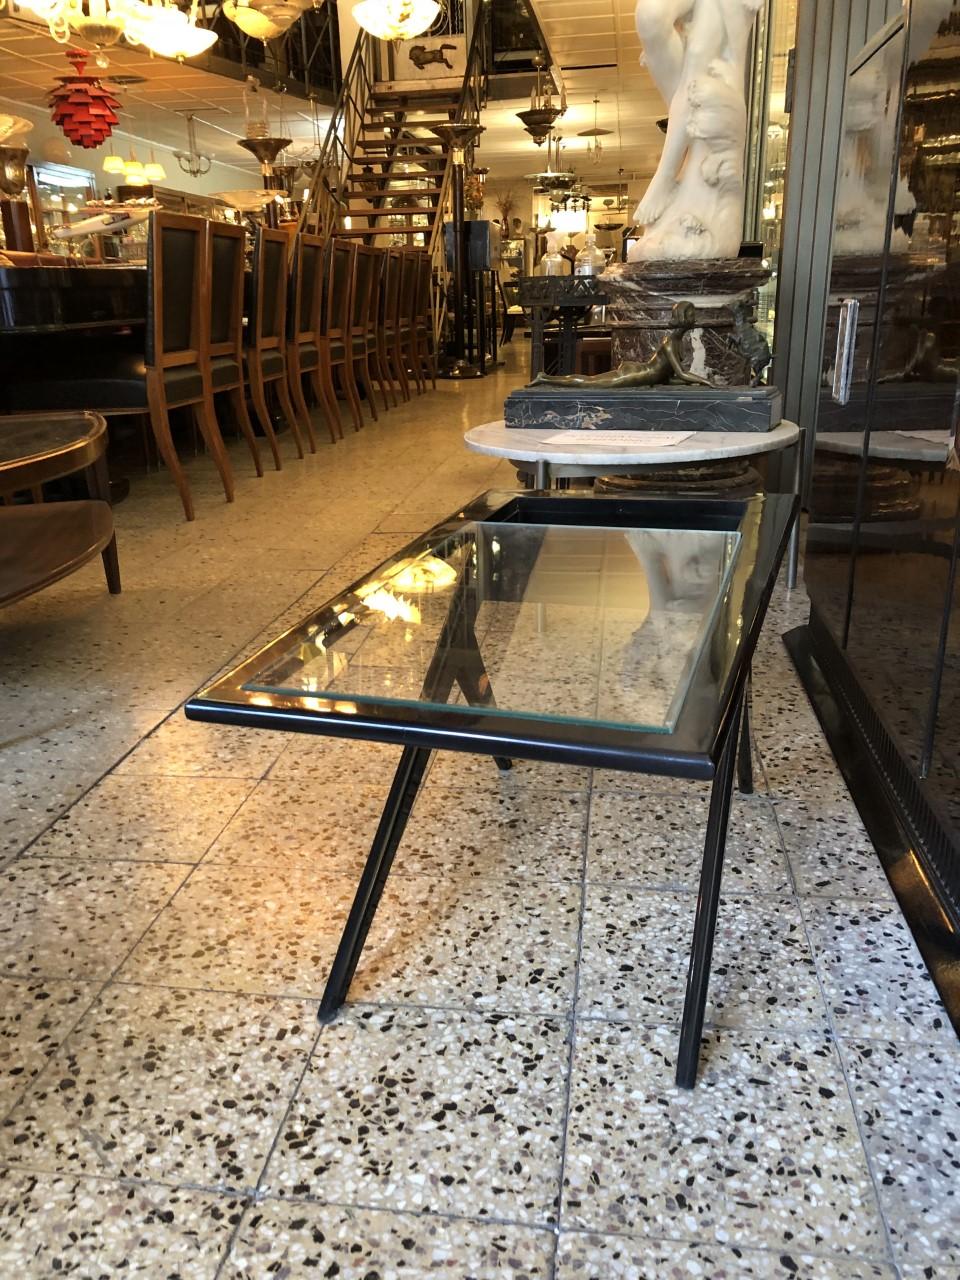 Italian table.
We have specialized in the sale of Art Deco and Art Nouveau and Vintage styles since 1982. If you have any questions we are at your disposal.
Pushing the button that reads 'View All From Seller'. And you can see more objects to the